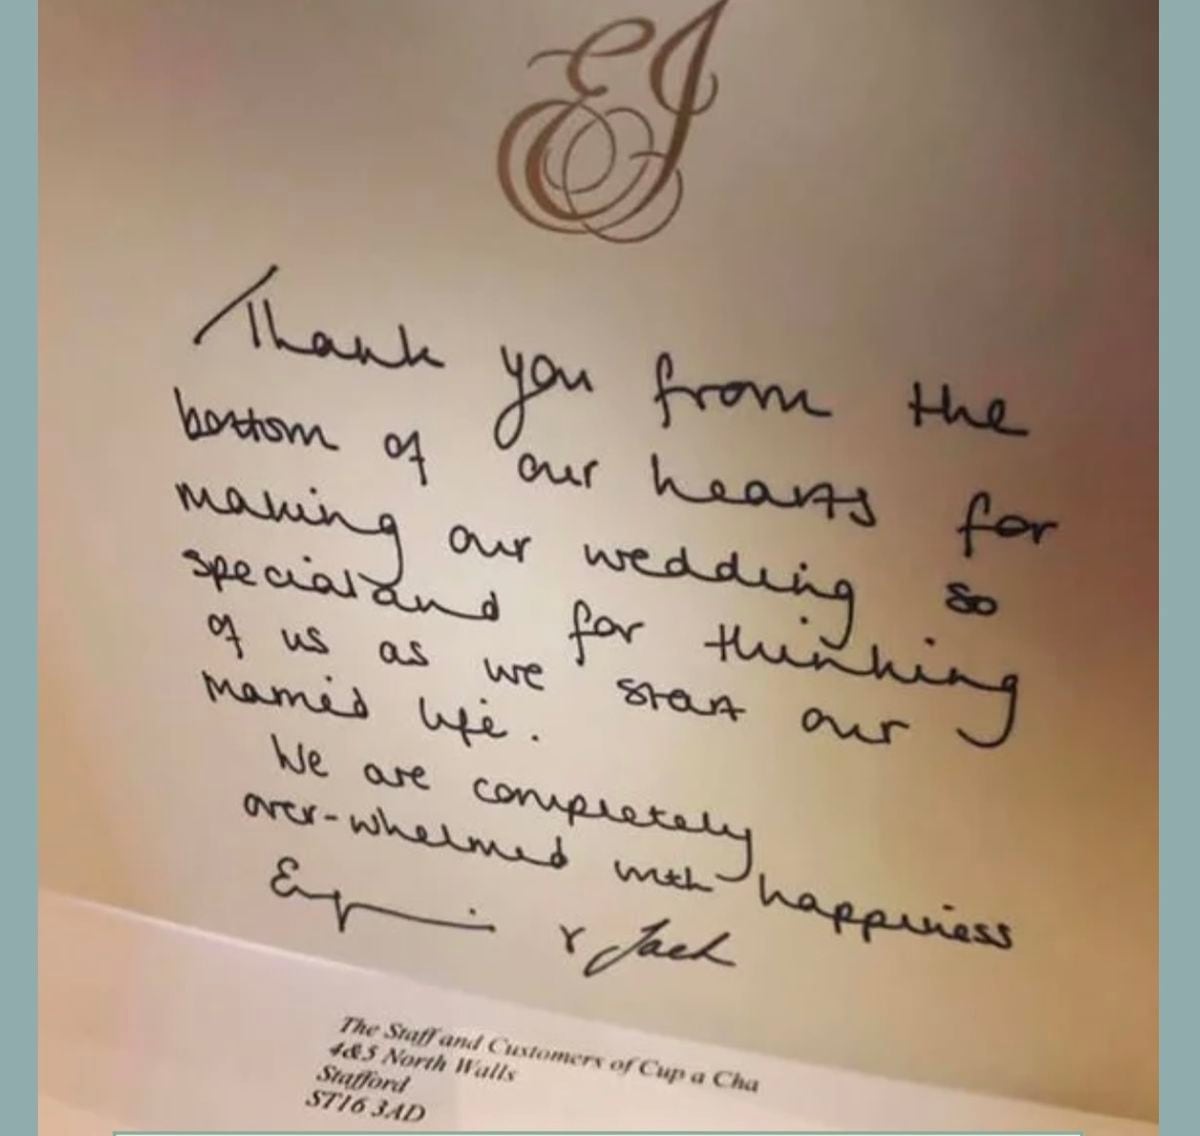 A handwritten letter to Princess Eugenie and Jack Brooksbank's cafe after their wedding